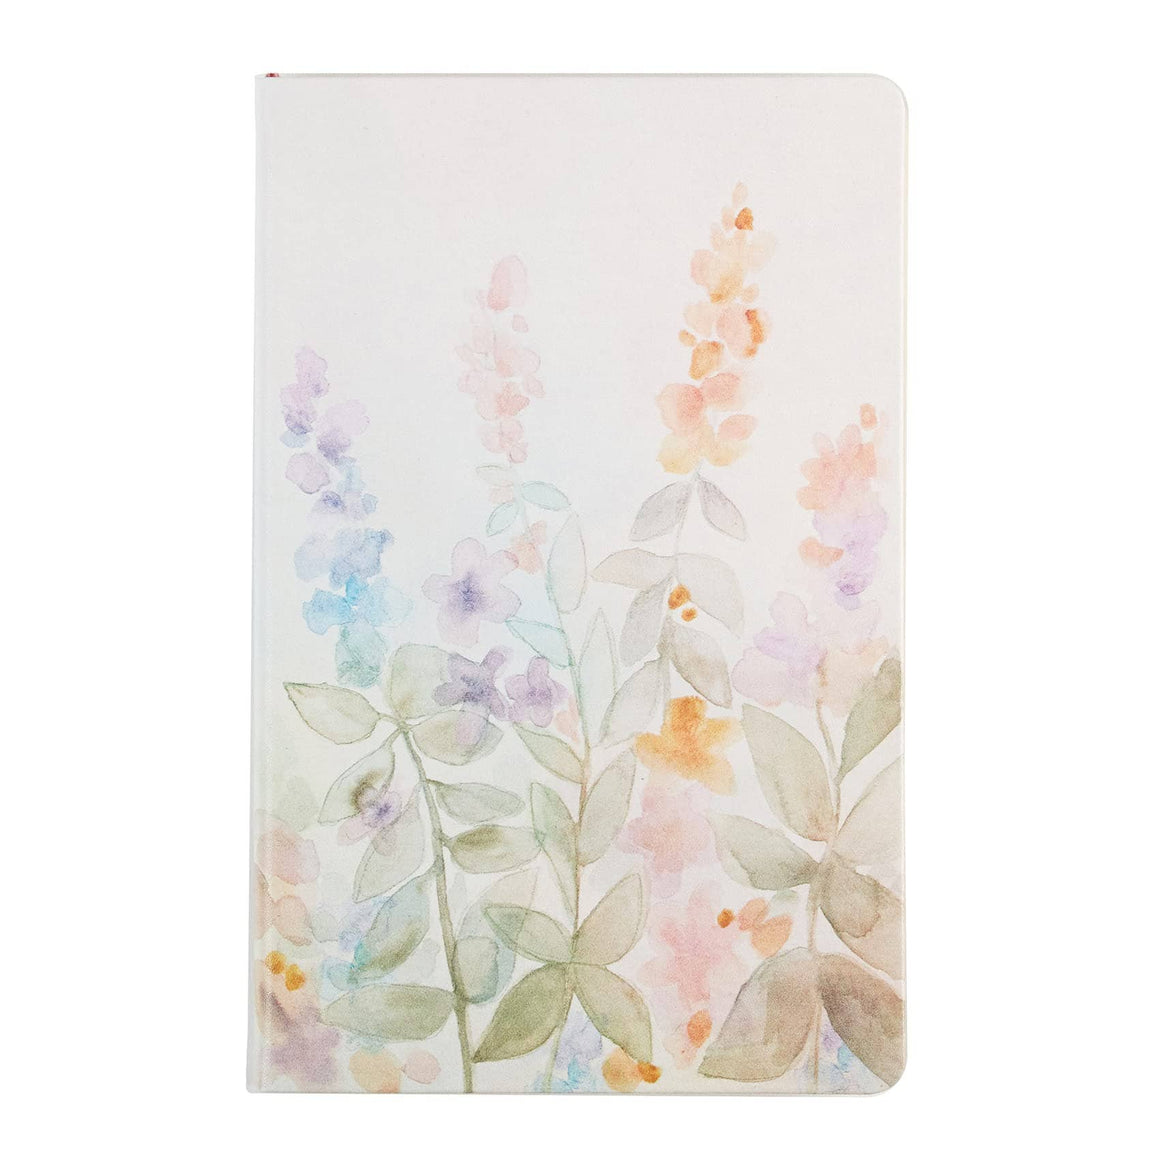 Softbound Notebook - Watercolor Meadows, Lined 5x8